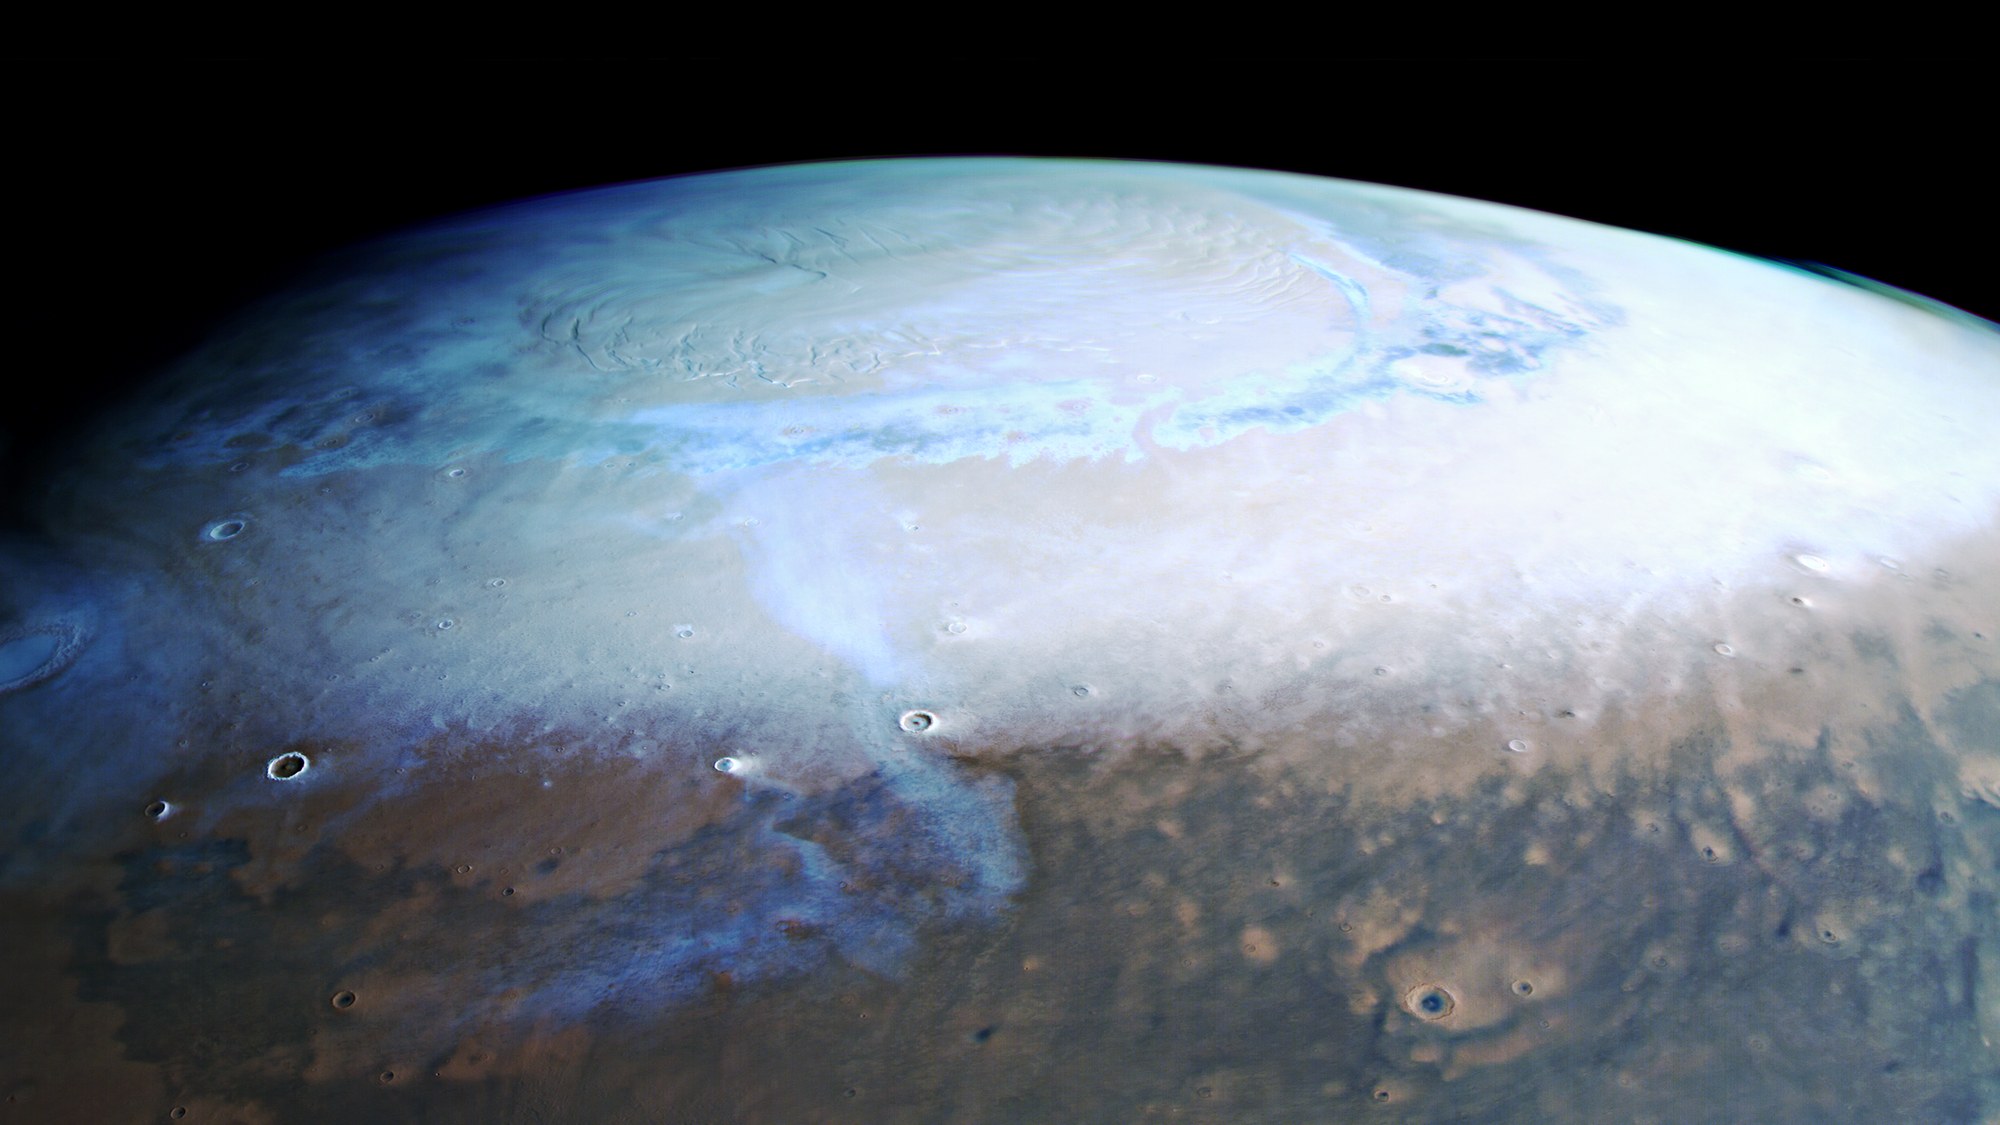 The start of spring at the North Pole on Mars